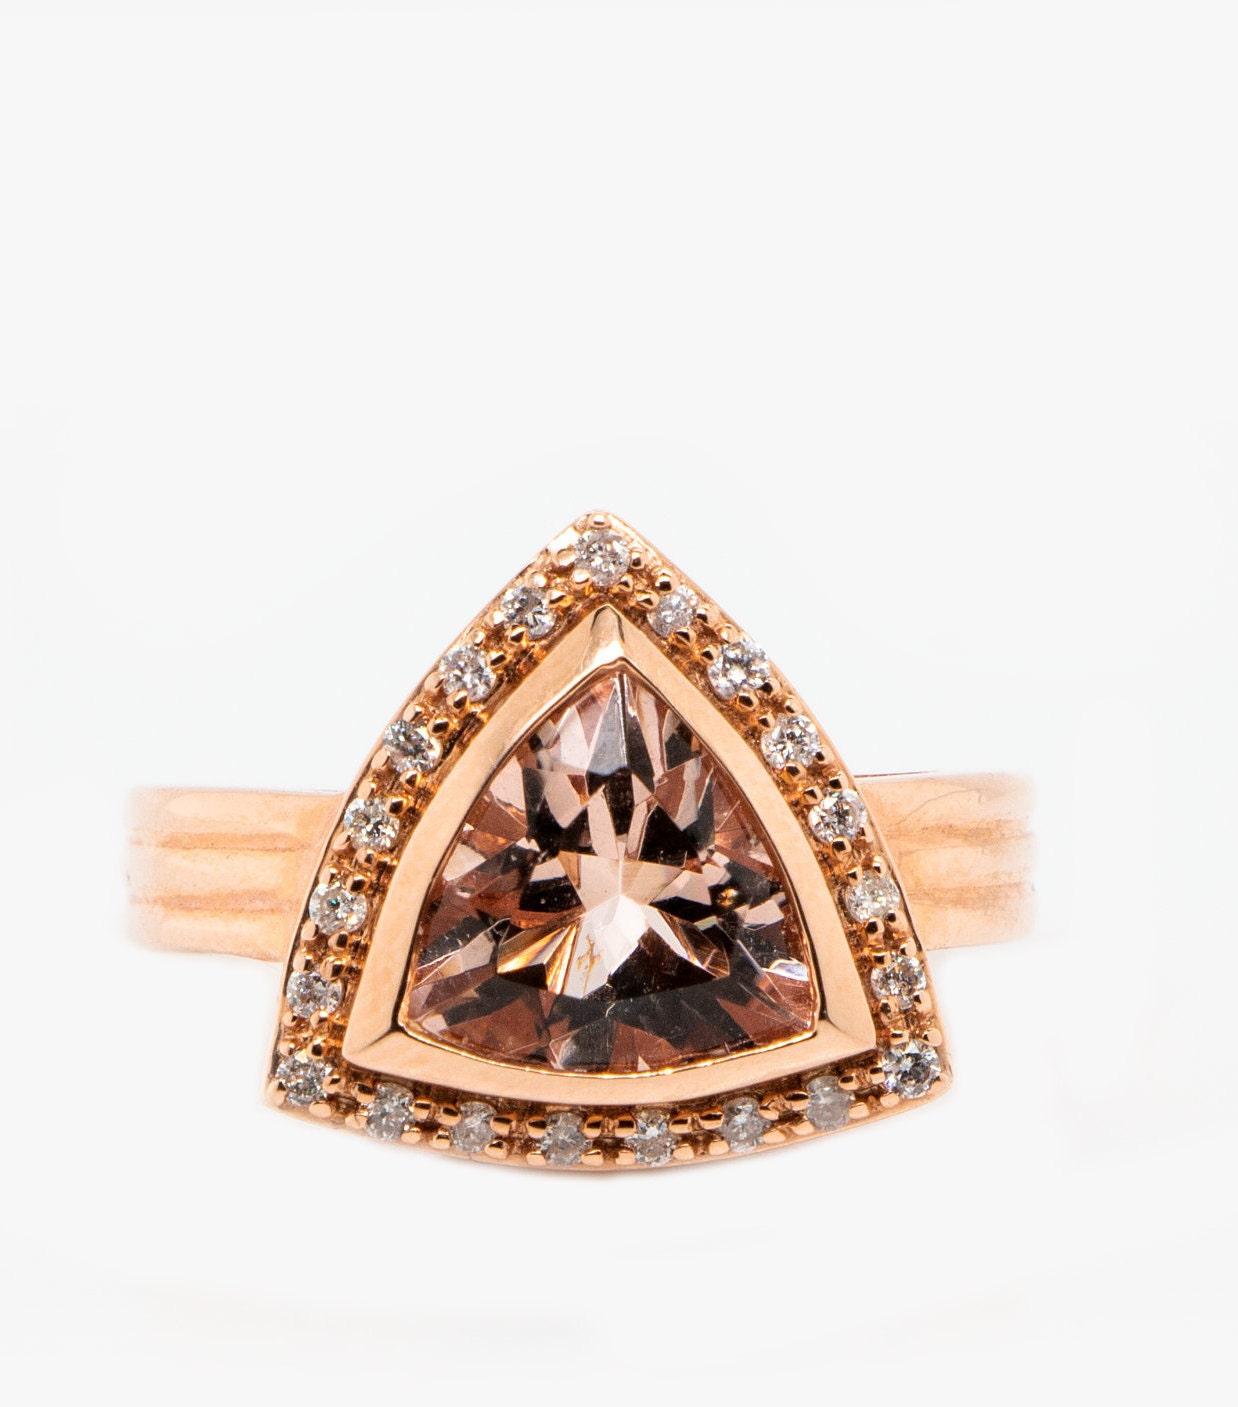 This is a gorgeous natural 2.19ct morganite and diamond vintage ring set in solid 14K rose gold. The natural 10MM trillion cut morganite has an excellent peachy pink color (AAA quality gem) and is surrounded by a halo of round cut white diamonds.